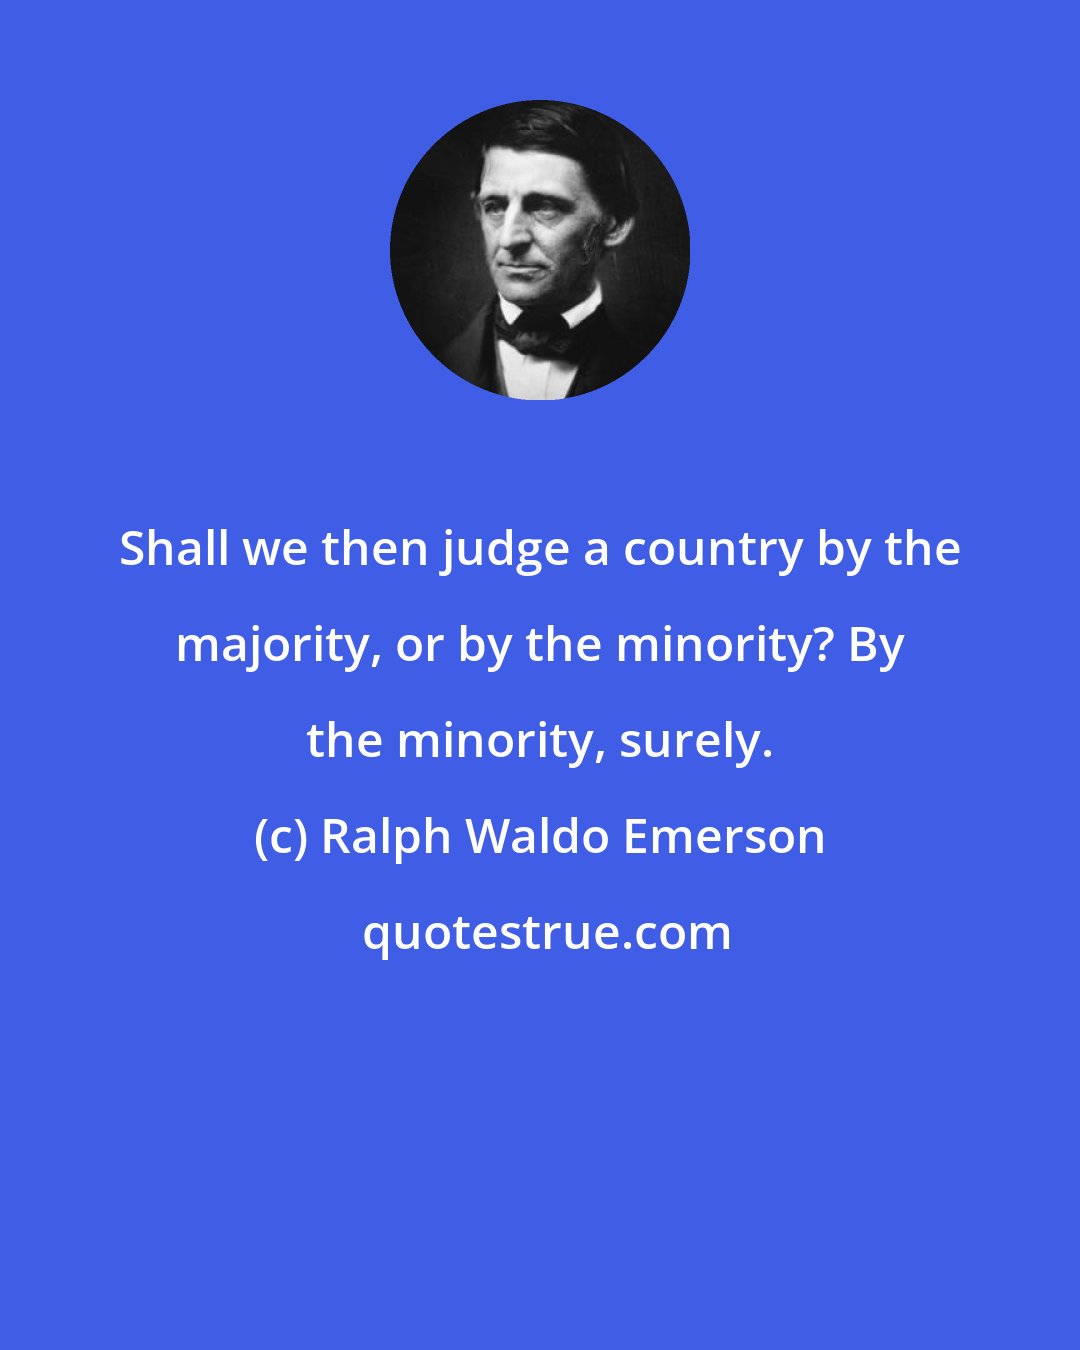 Ralph Waldo Emerson: Shall we then judge a country by the majority, or by the minority? By the minority, surely.